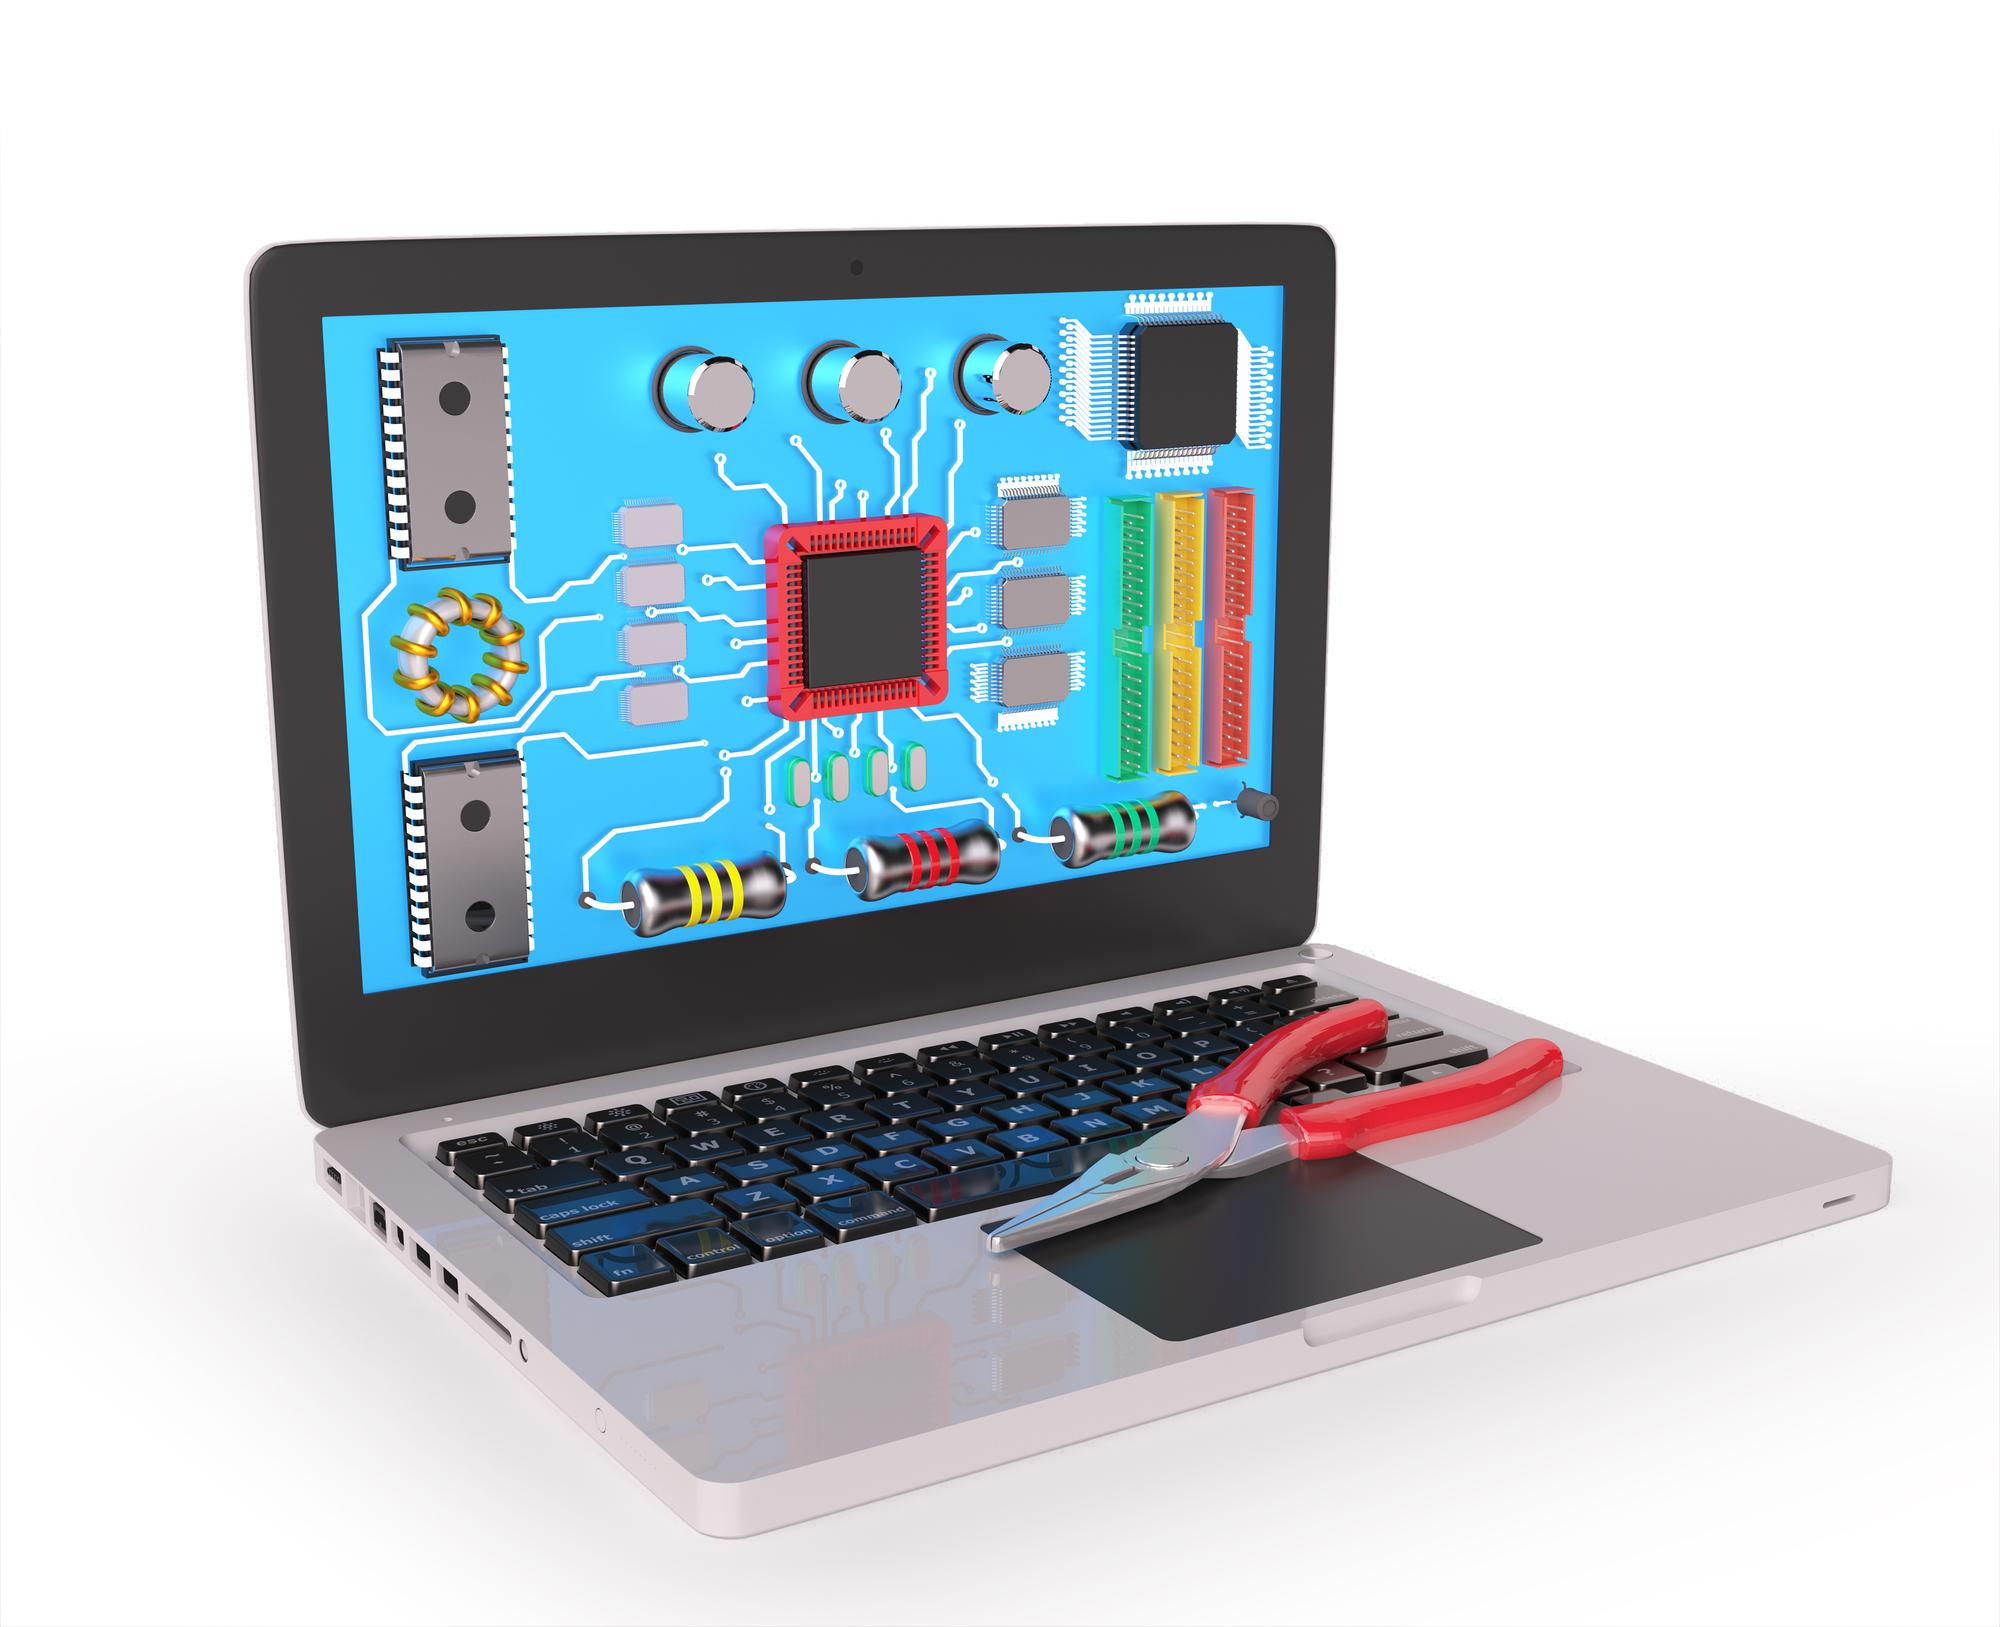 data maintenance concept shown through circuit board and tools on laptop screen